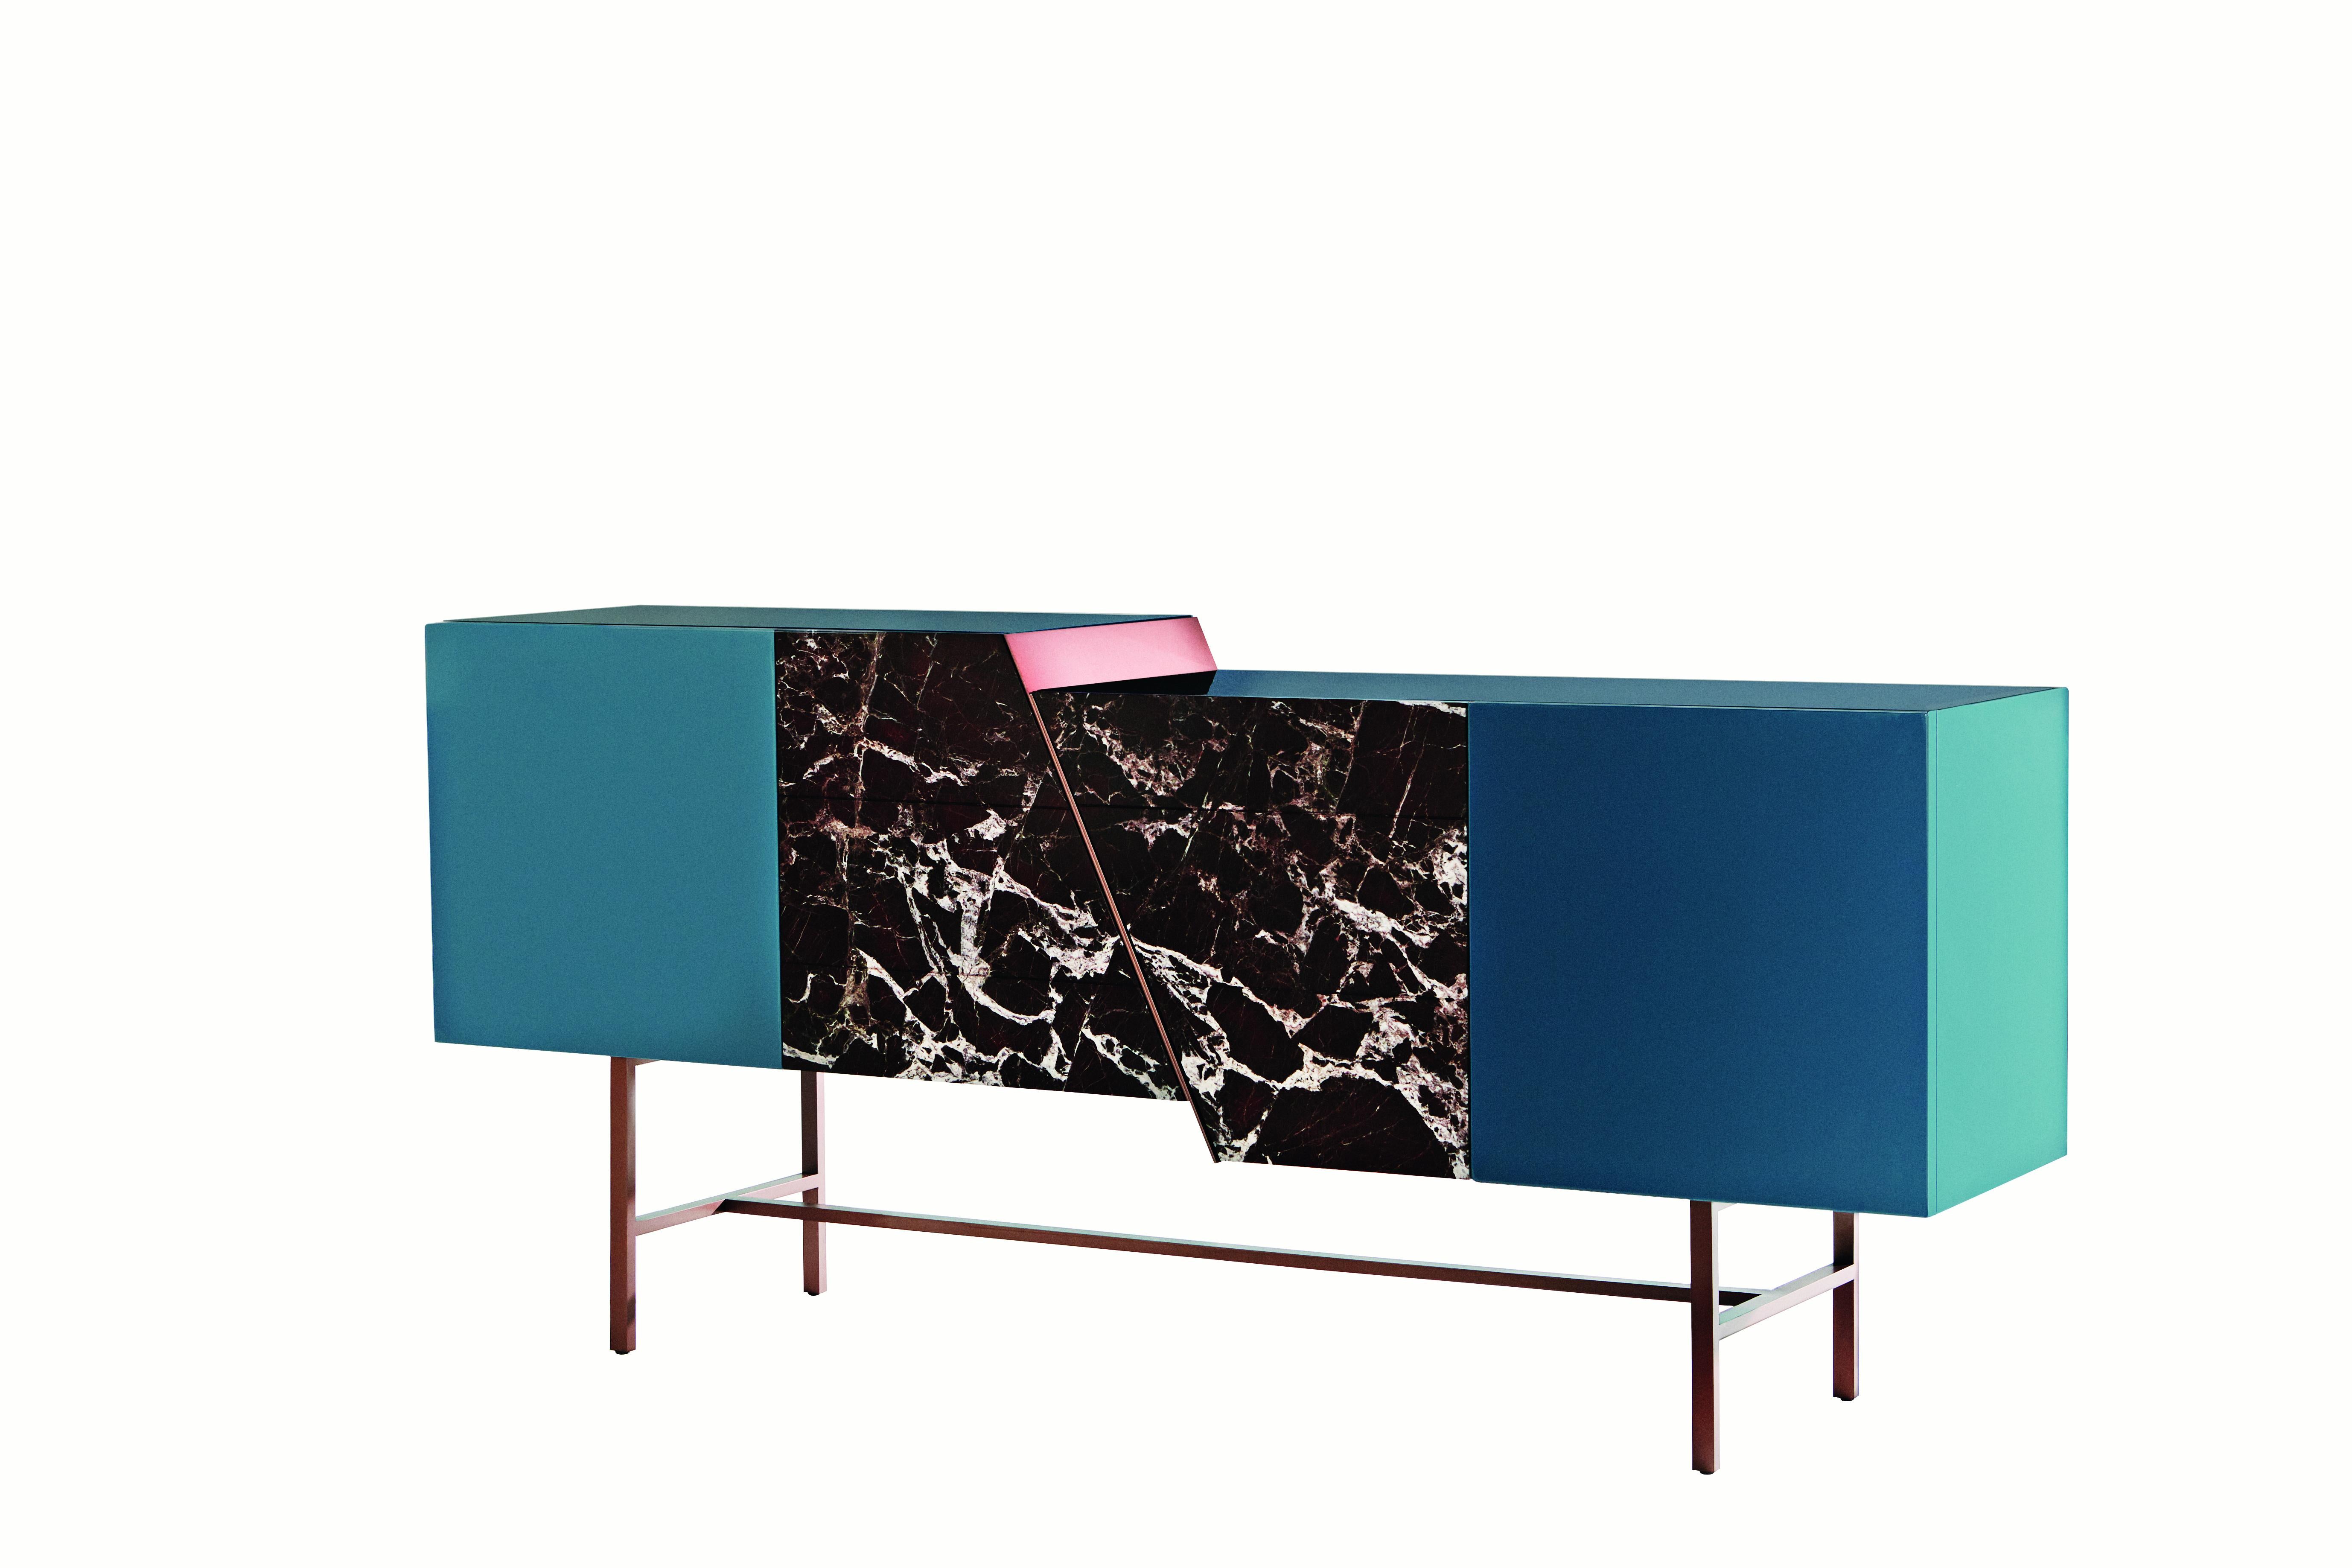 Trapeze sideboard by Hagit Pincovici
Dimensions: 225 L x 50 W x 120 H
Materials: Lacquered wood, Rosso Lepanto Marble, Copper finish

Hagit Pincovici founded her eponymous bespoke luxury furniture and lighting atelier in 2014. Known in her